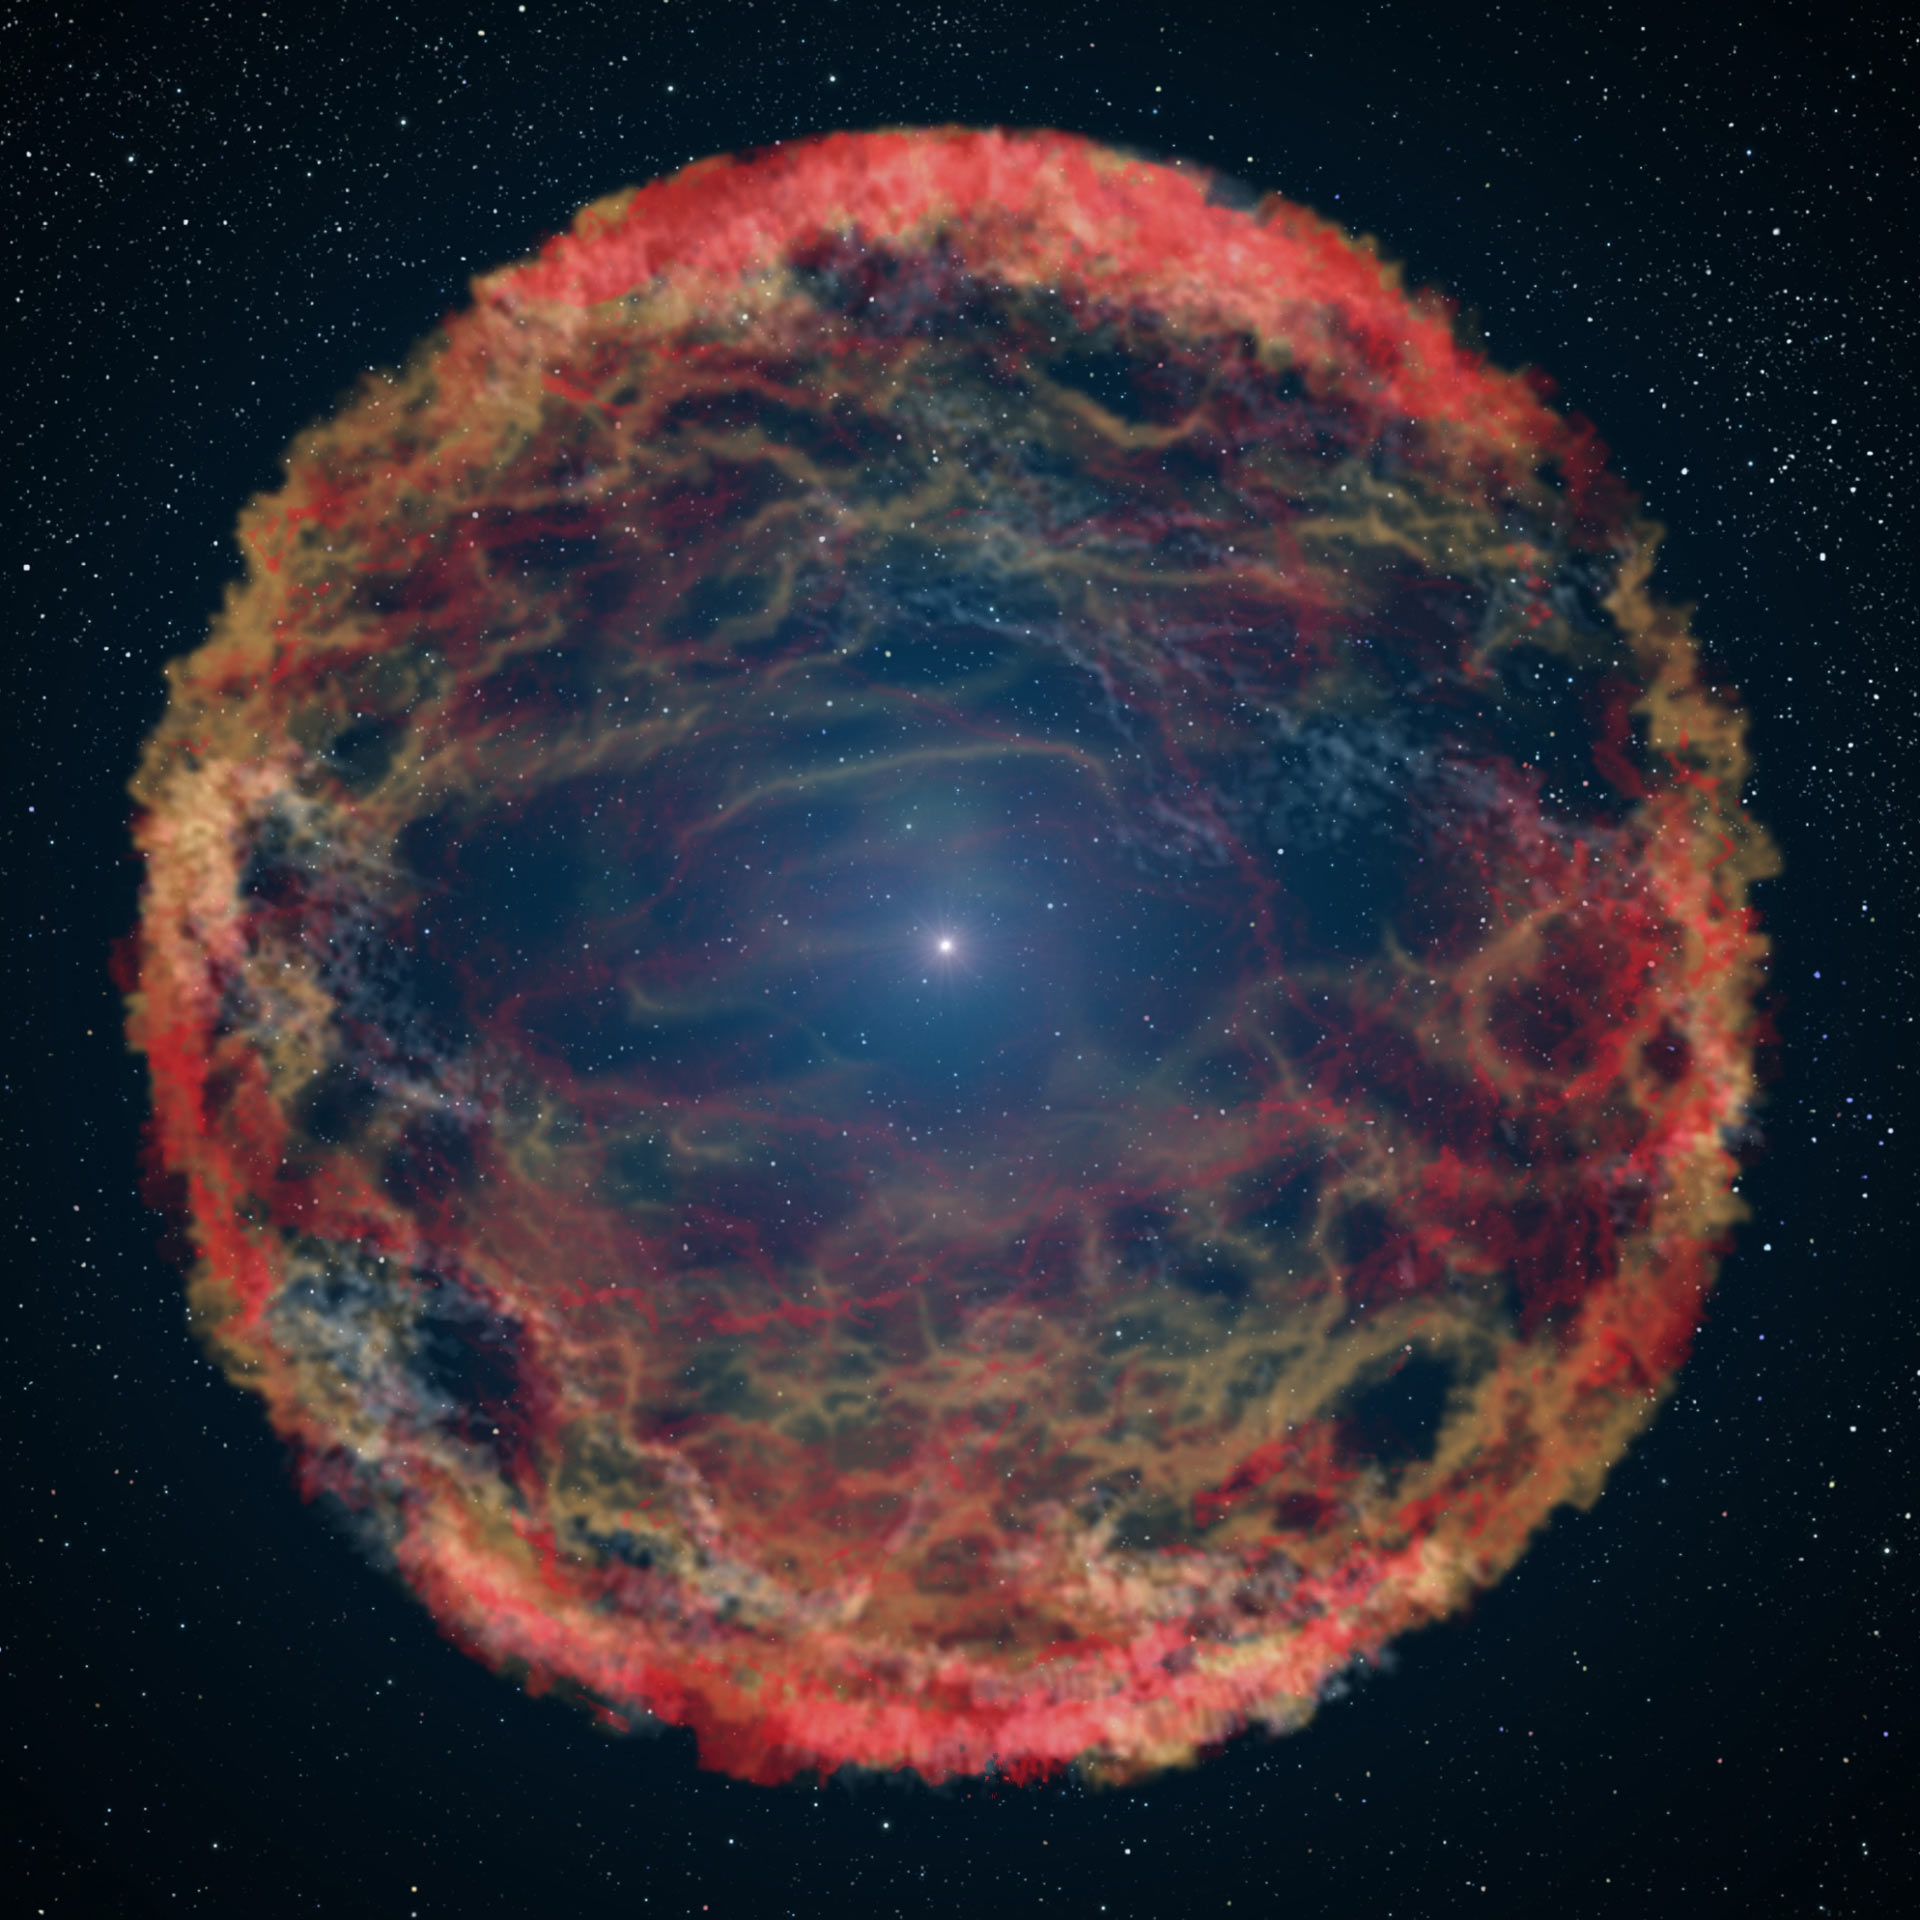 A simulation of another supernova that Hubble photographed. Star explosion is an elusive phenomenon due to the inability to predict it. Illustration: NASA, ESA, G. Bacon (STScI)